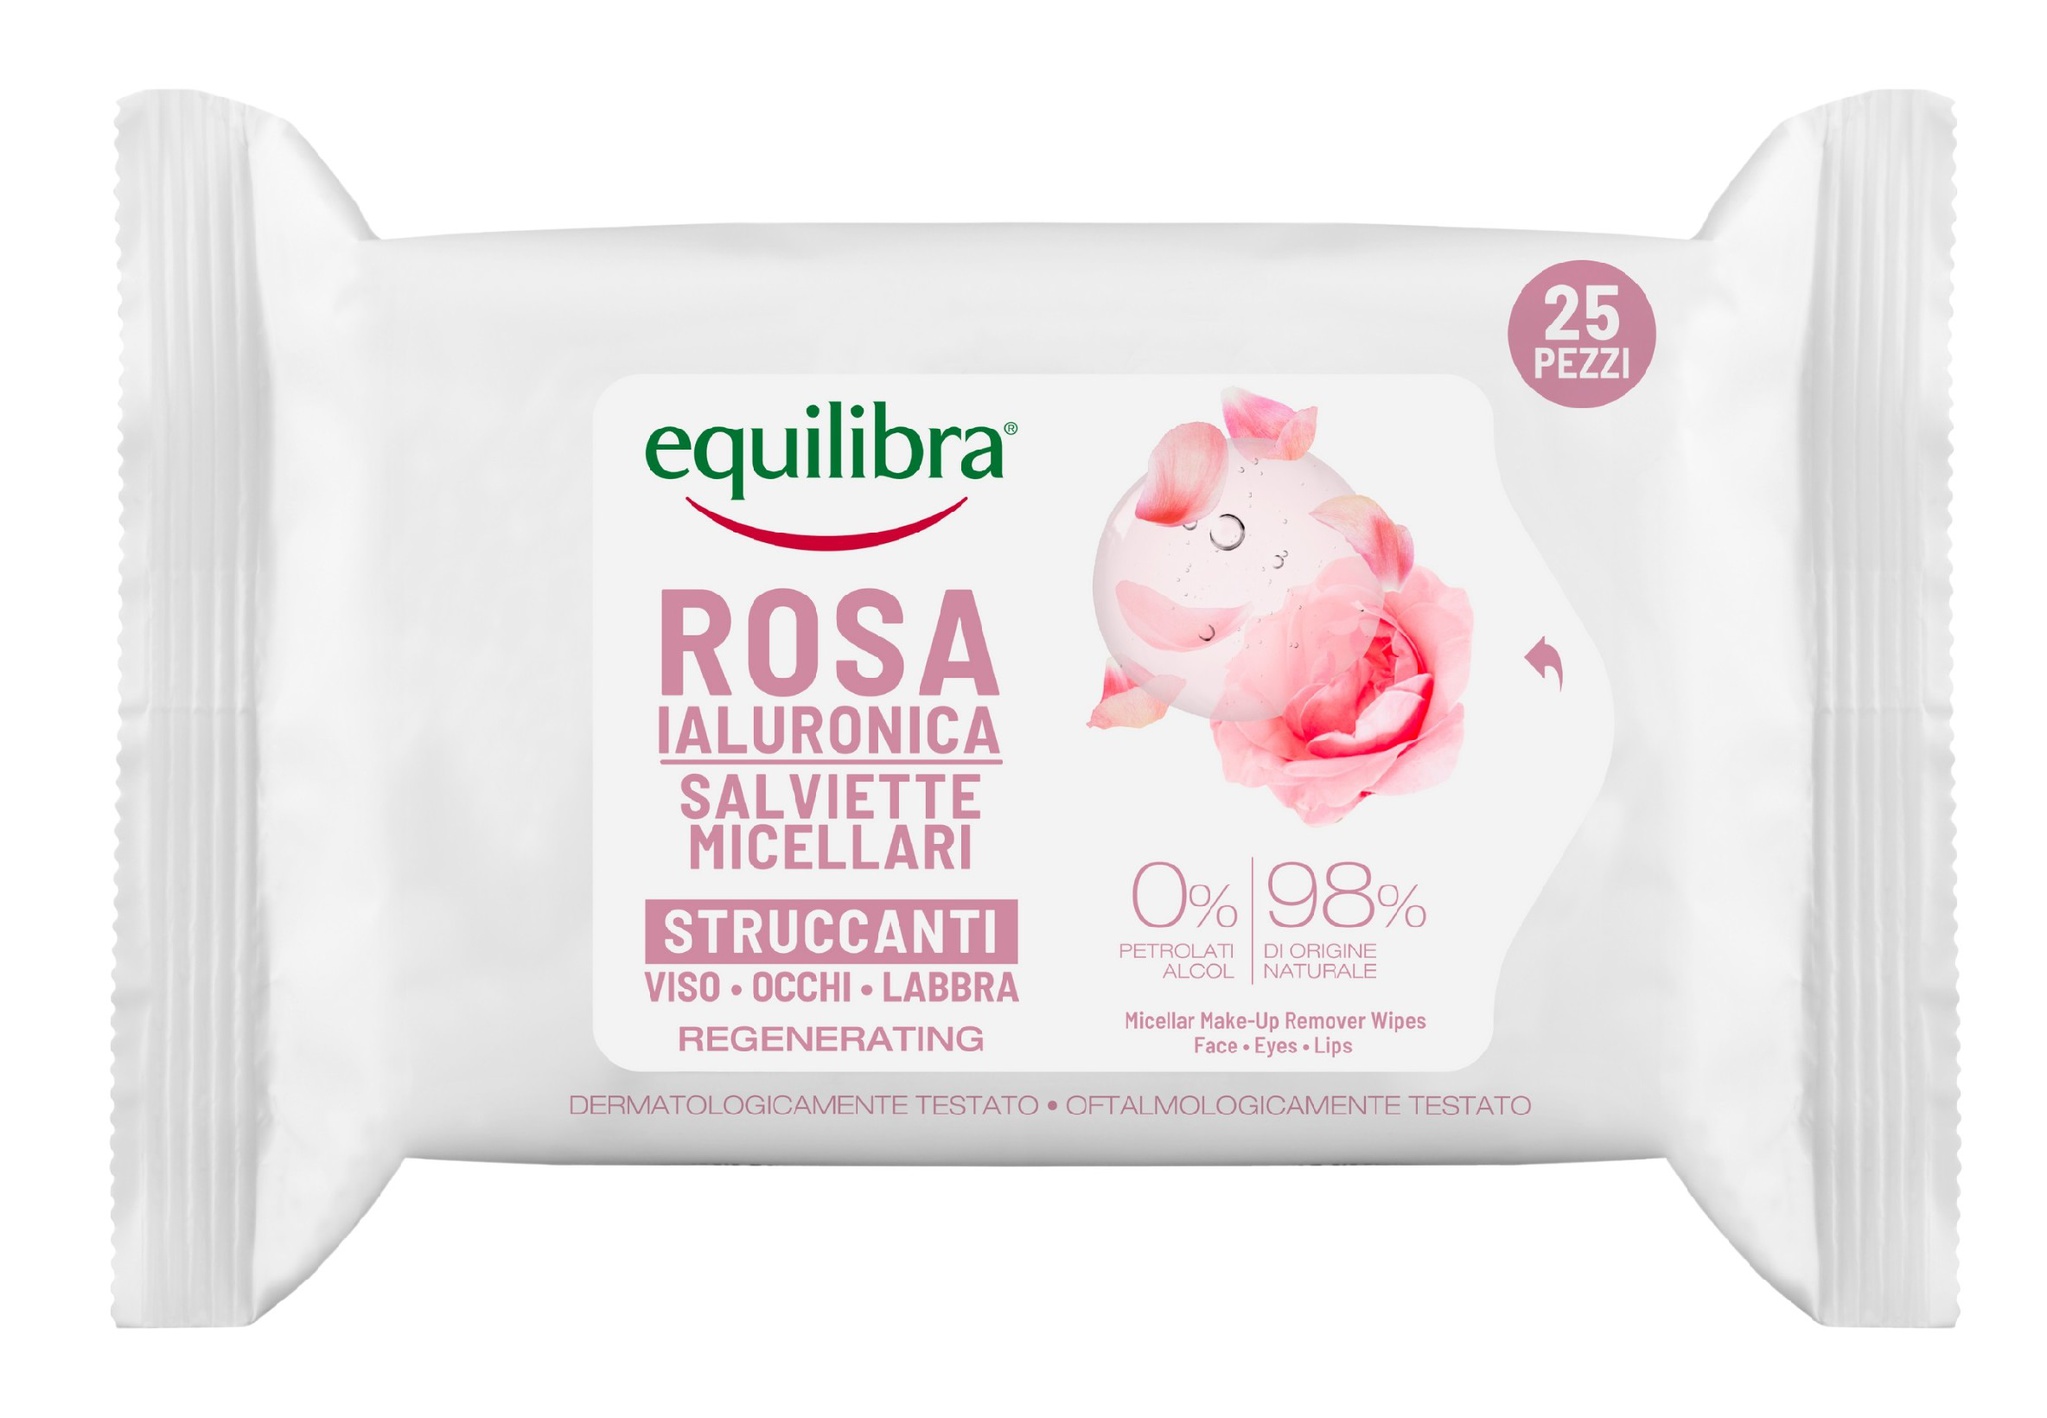 Equilibra Rosa Ialuronica Micellar Makeup Remover Wipes